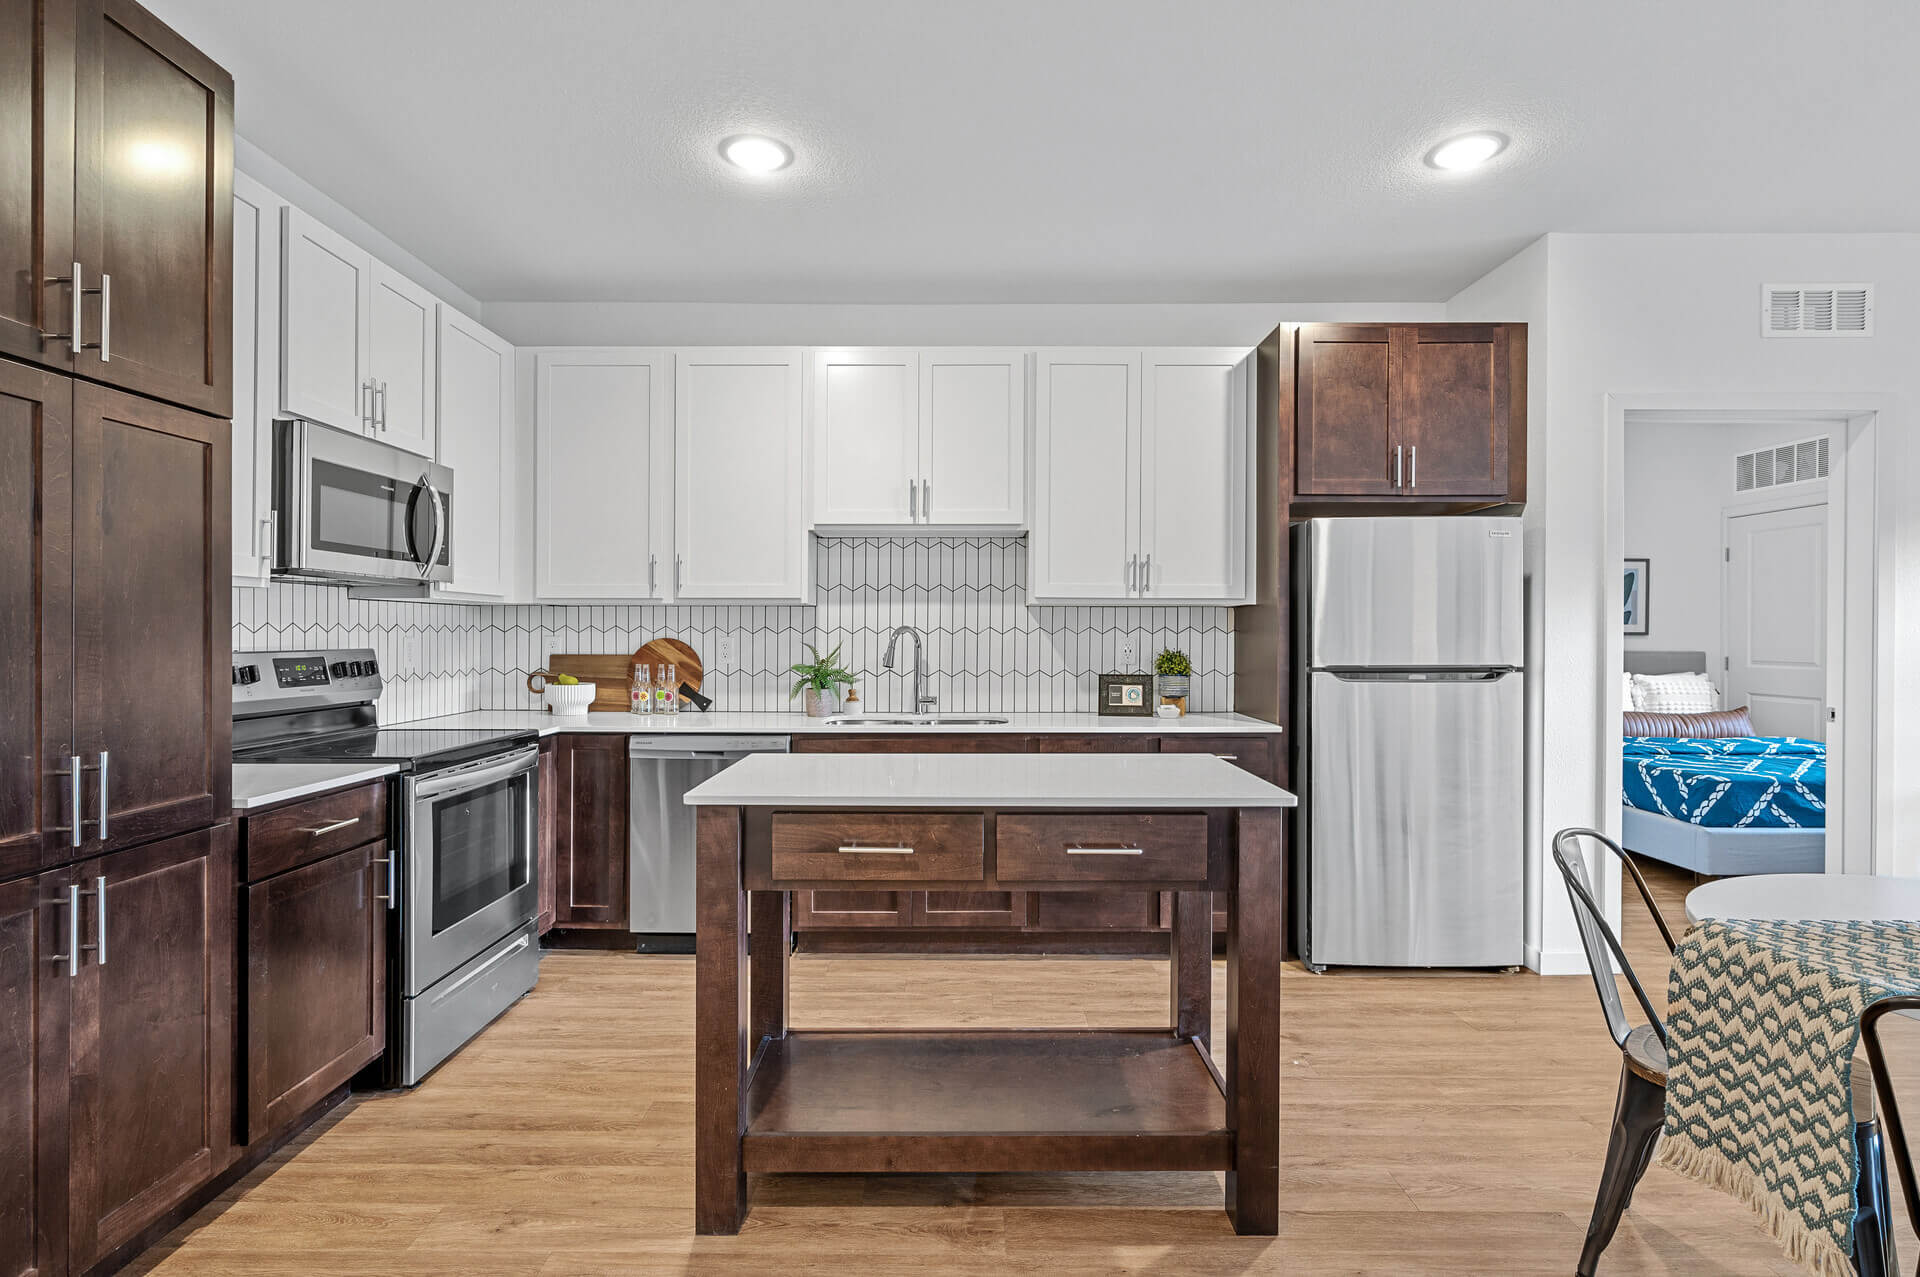 Bright kitchen with a mix of white and dark wood cabinets, stainless steel appliances, and a central kitchen island. The open layout reveals a glimpse into a dining area and a bedroom with blue bedding in the background.